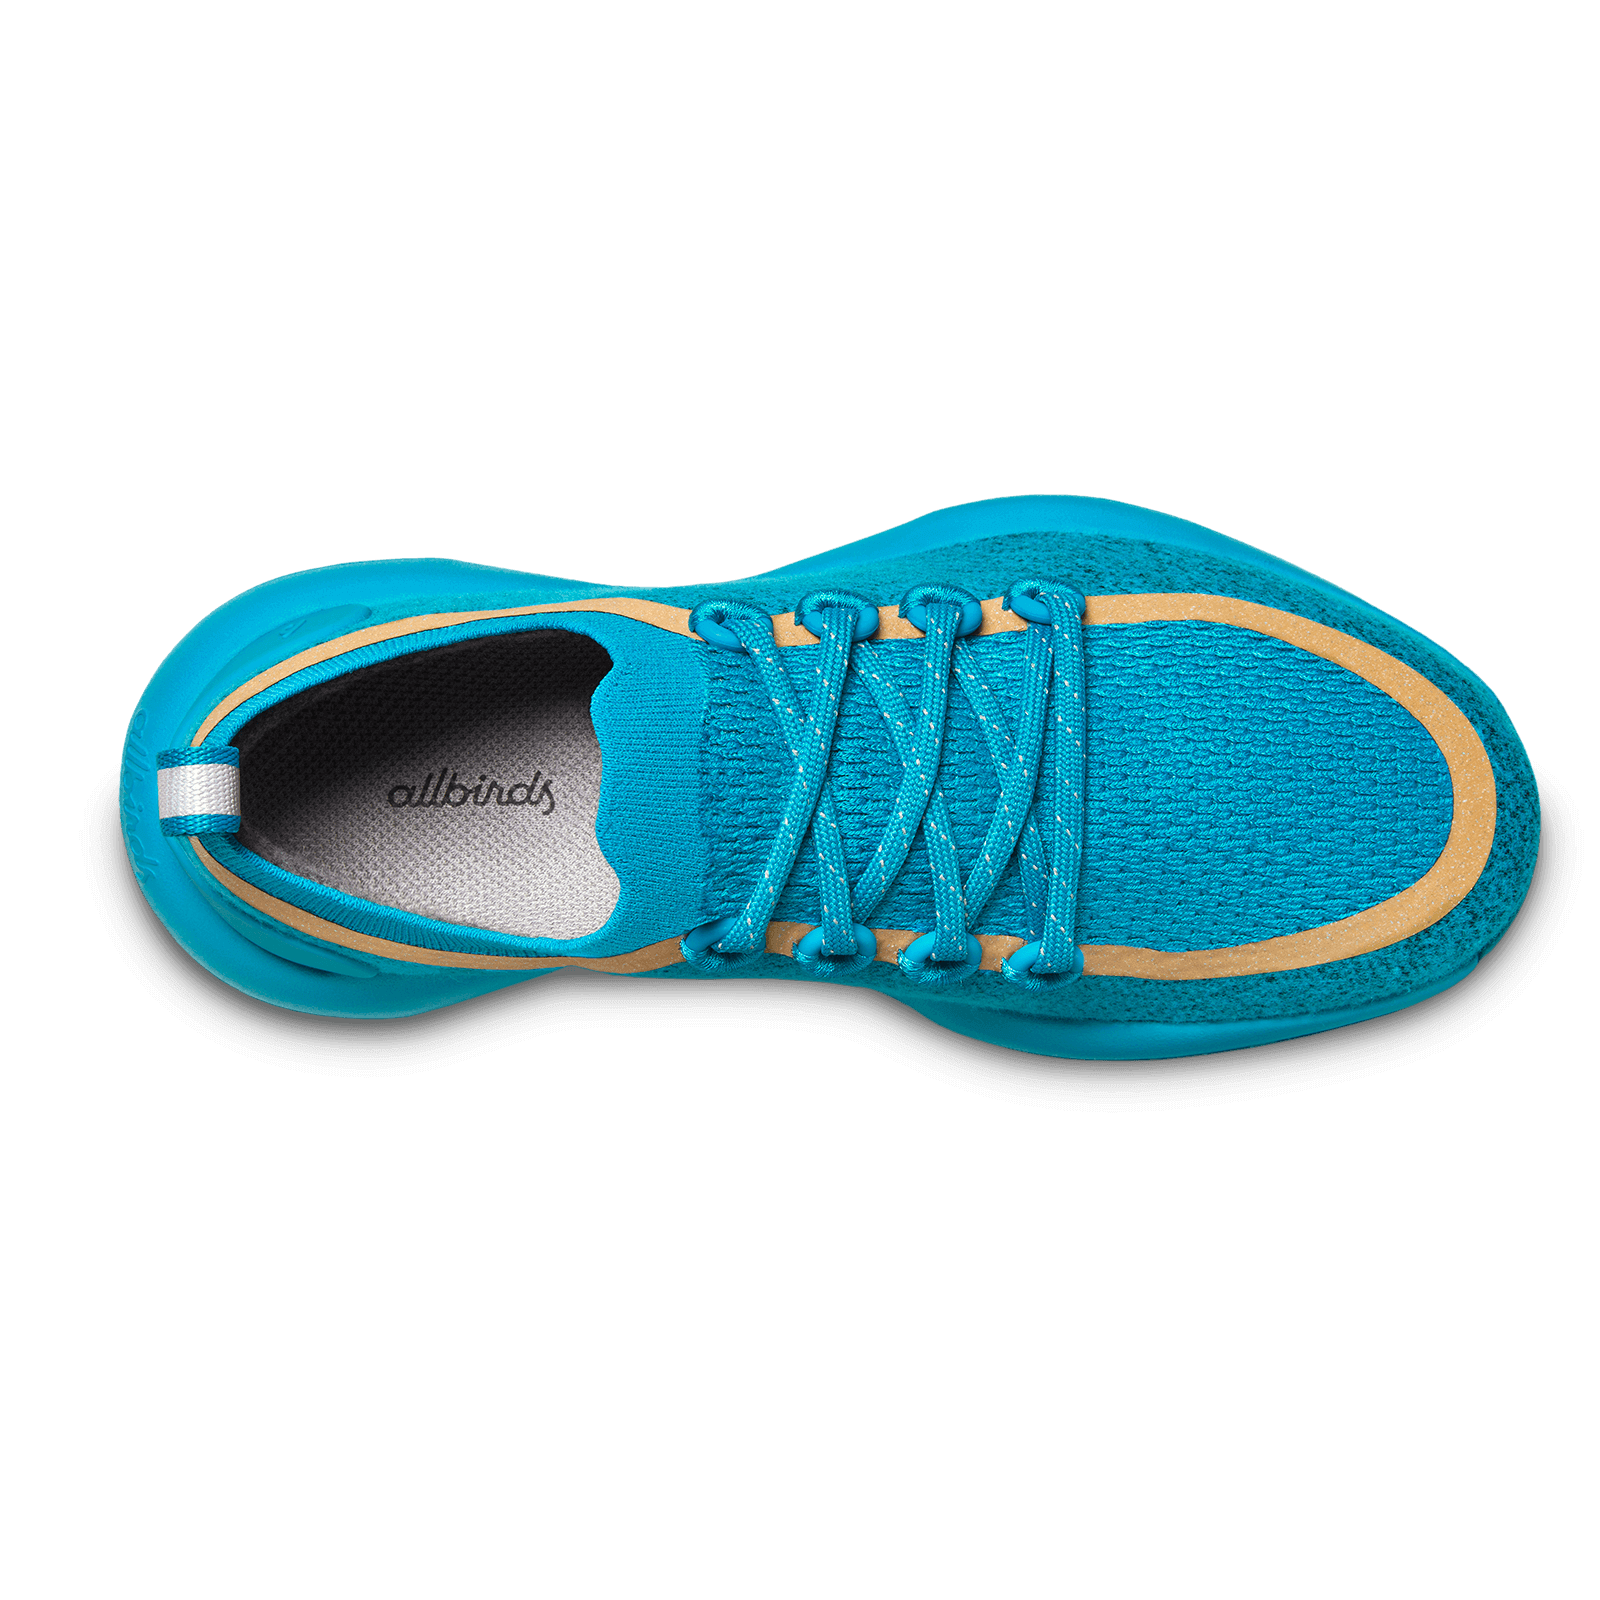 Women's Trail Runner SWT Mizzles - Thrive Teal (Thrive Teal Sole)